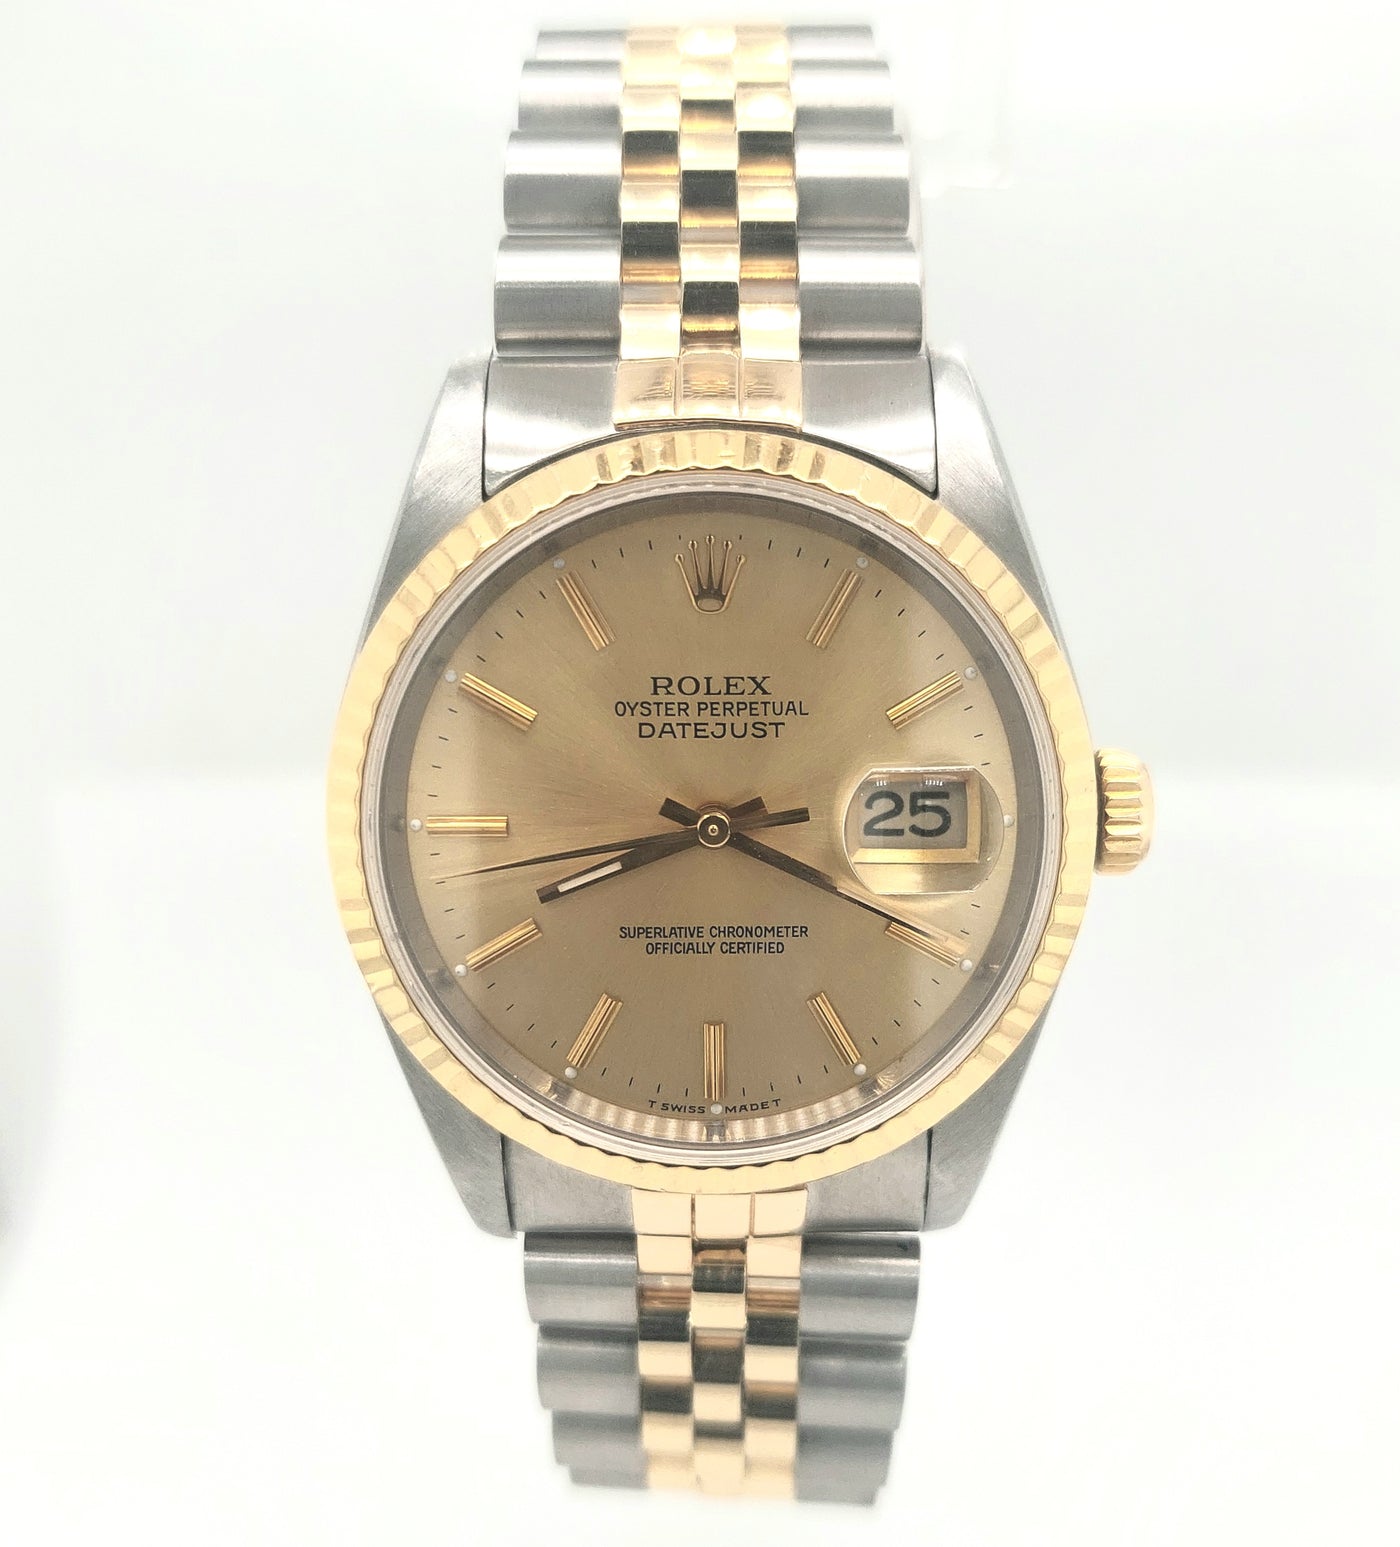 Gent's 18K Gold & Stainless Pre-owned Rolex Datejust with Champagne Dial, Circa 2001